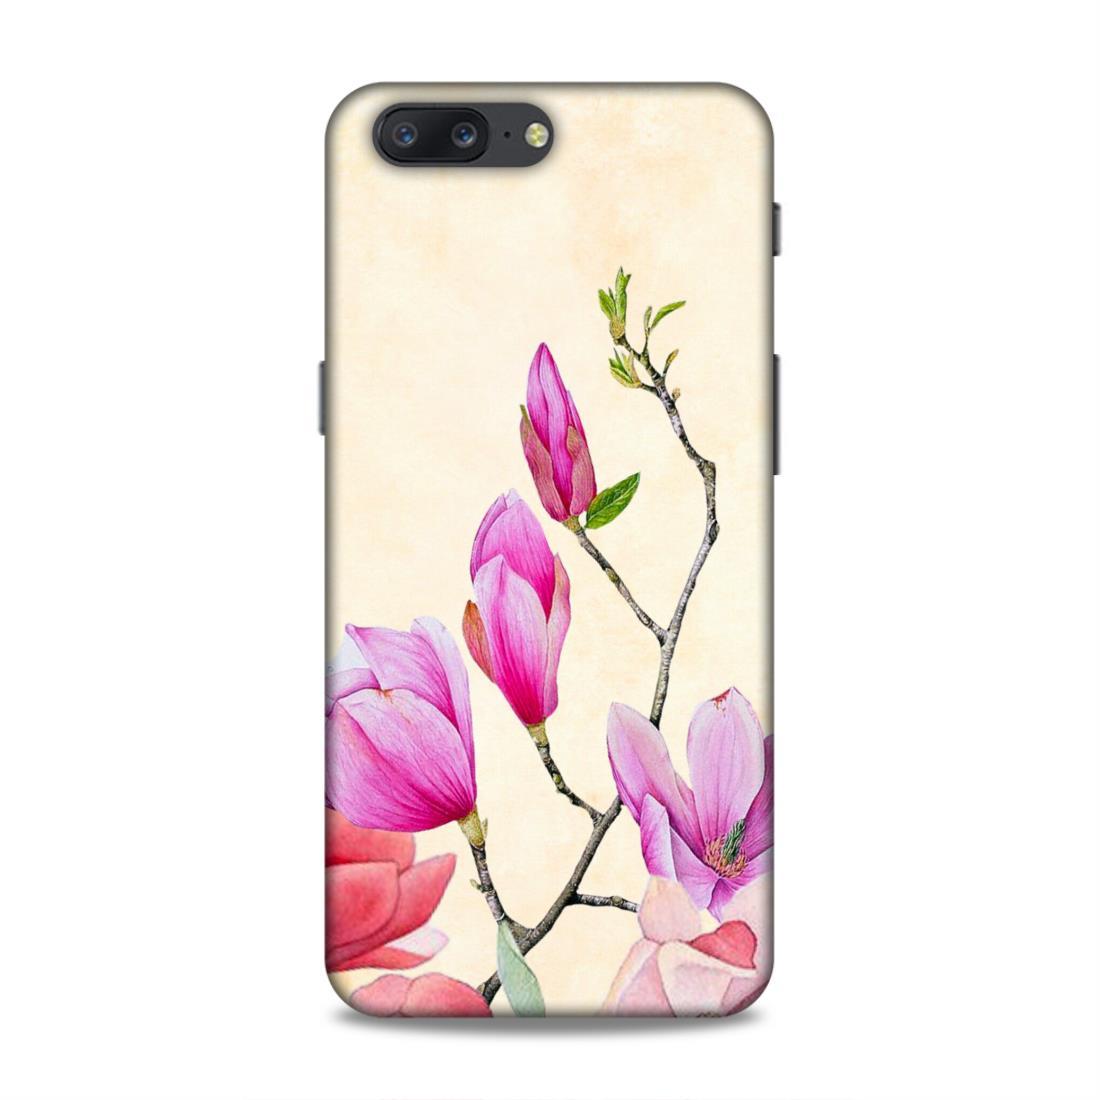 Pink Flower OnePlus 5 Mobile Cover Case